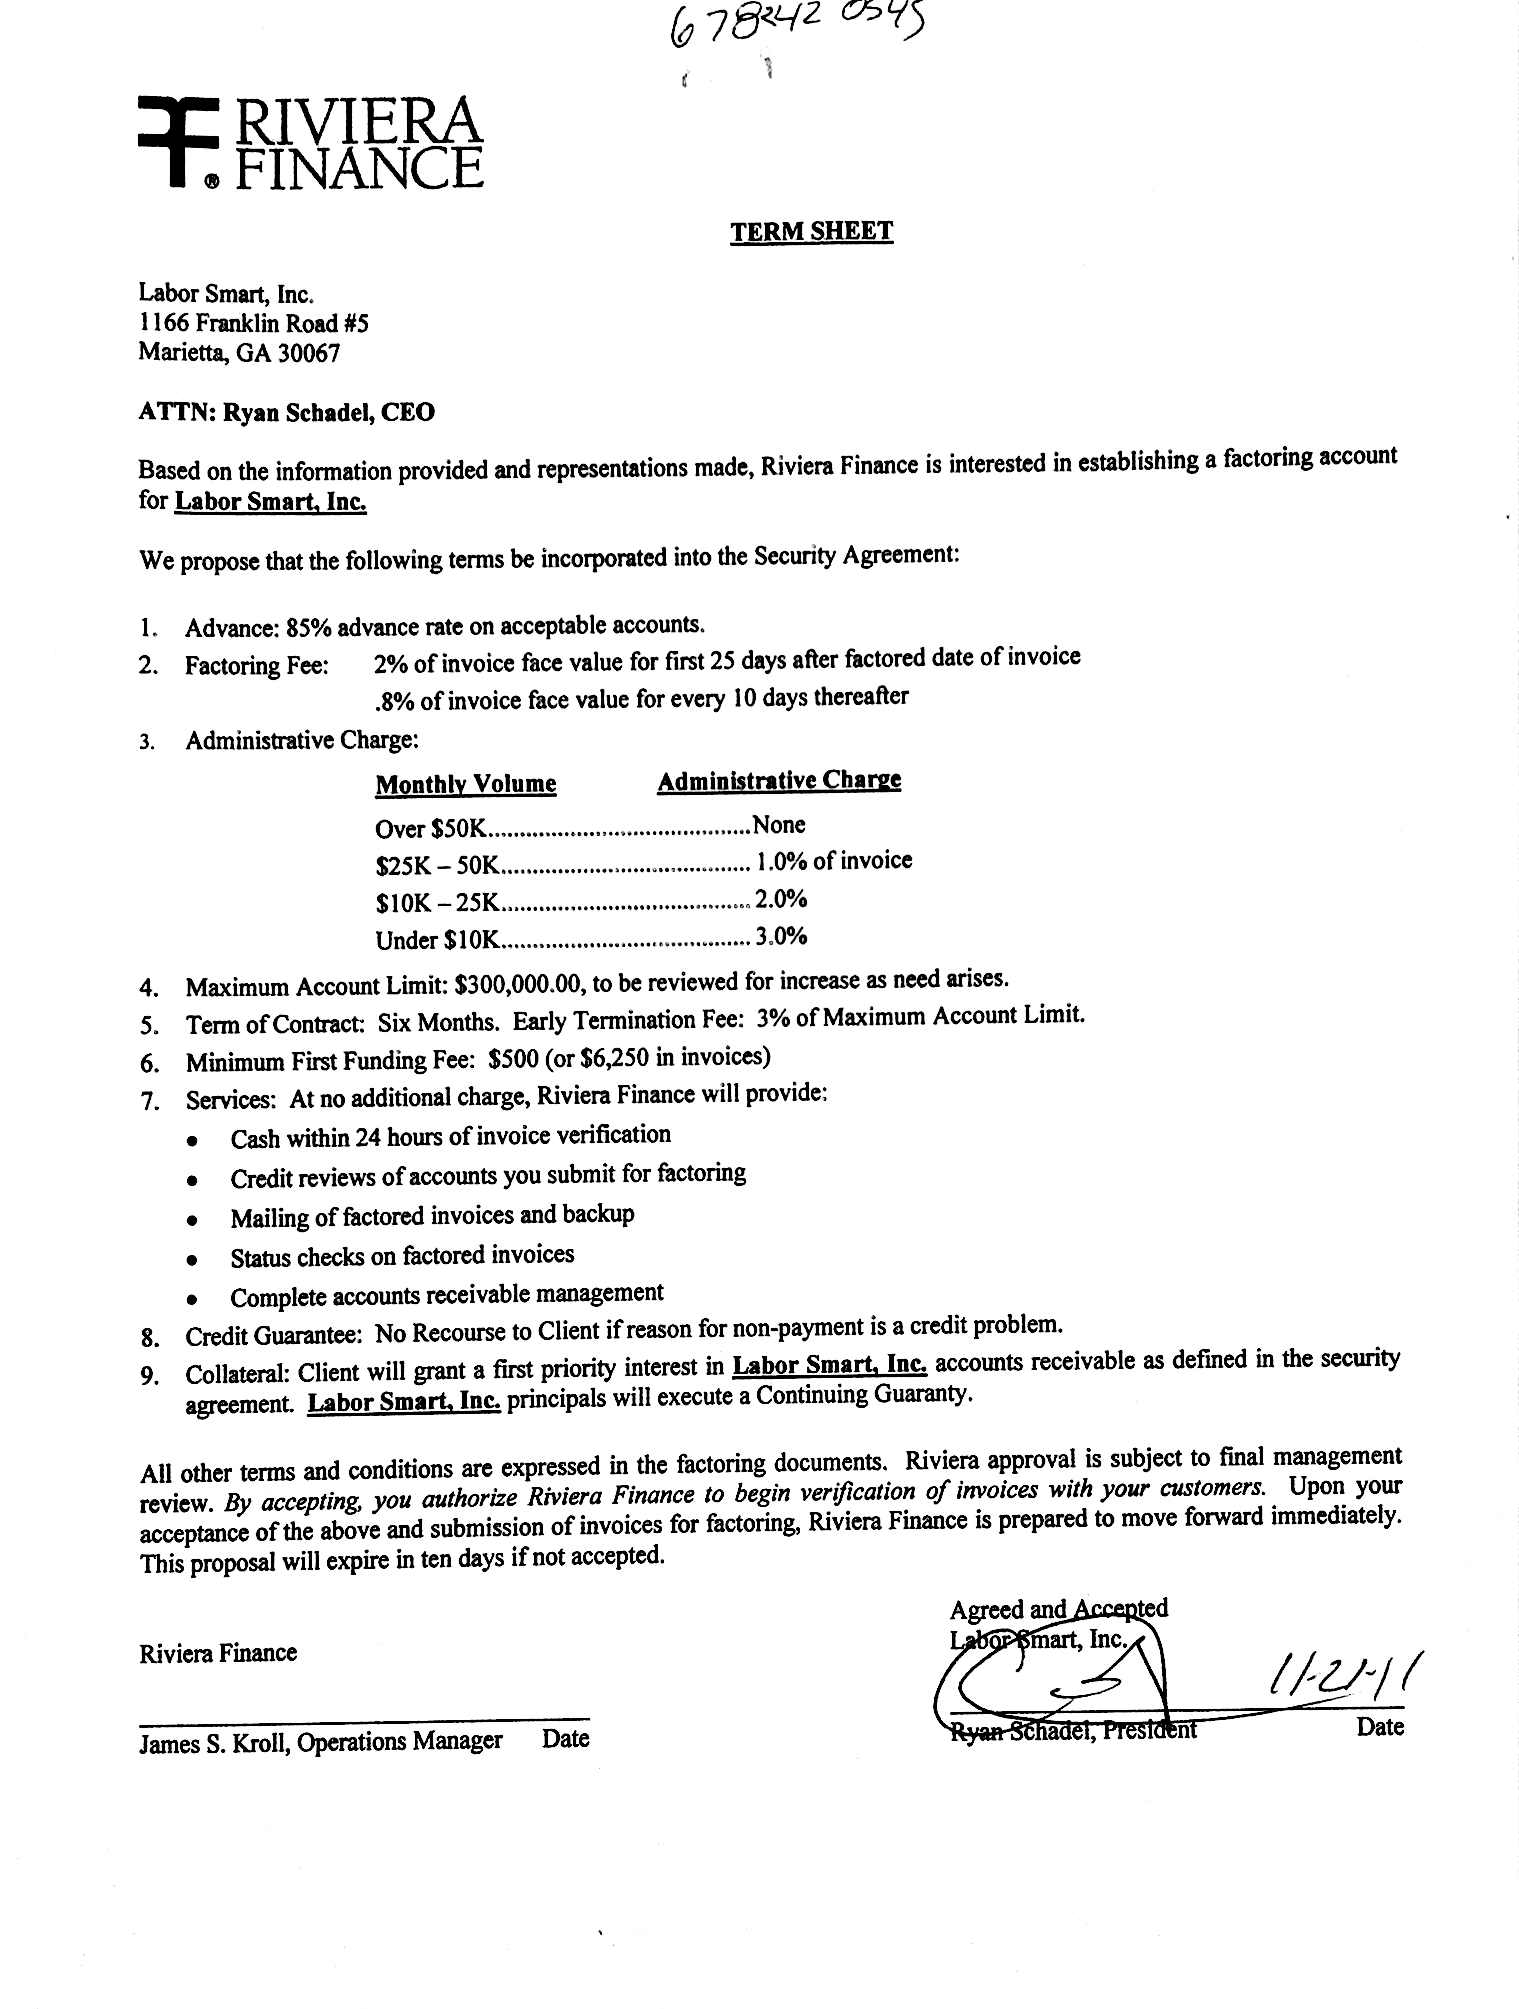 Labor Smart, Inc. - FORM S-21/A - EX-221.21 - FACTORING AGREEMENT Regarding Invoice Discounting Agreement Template